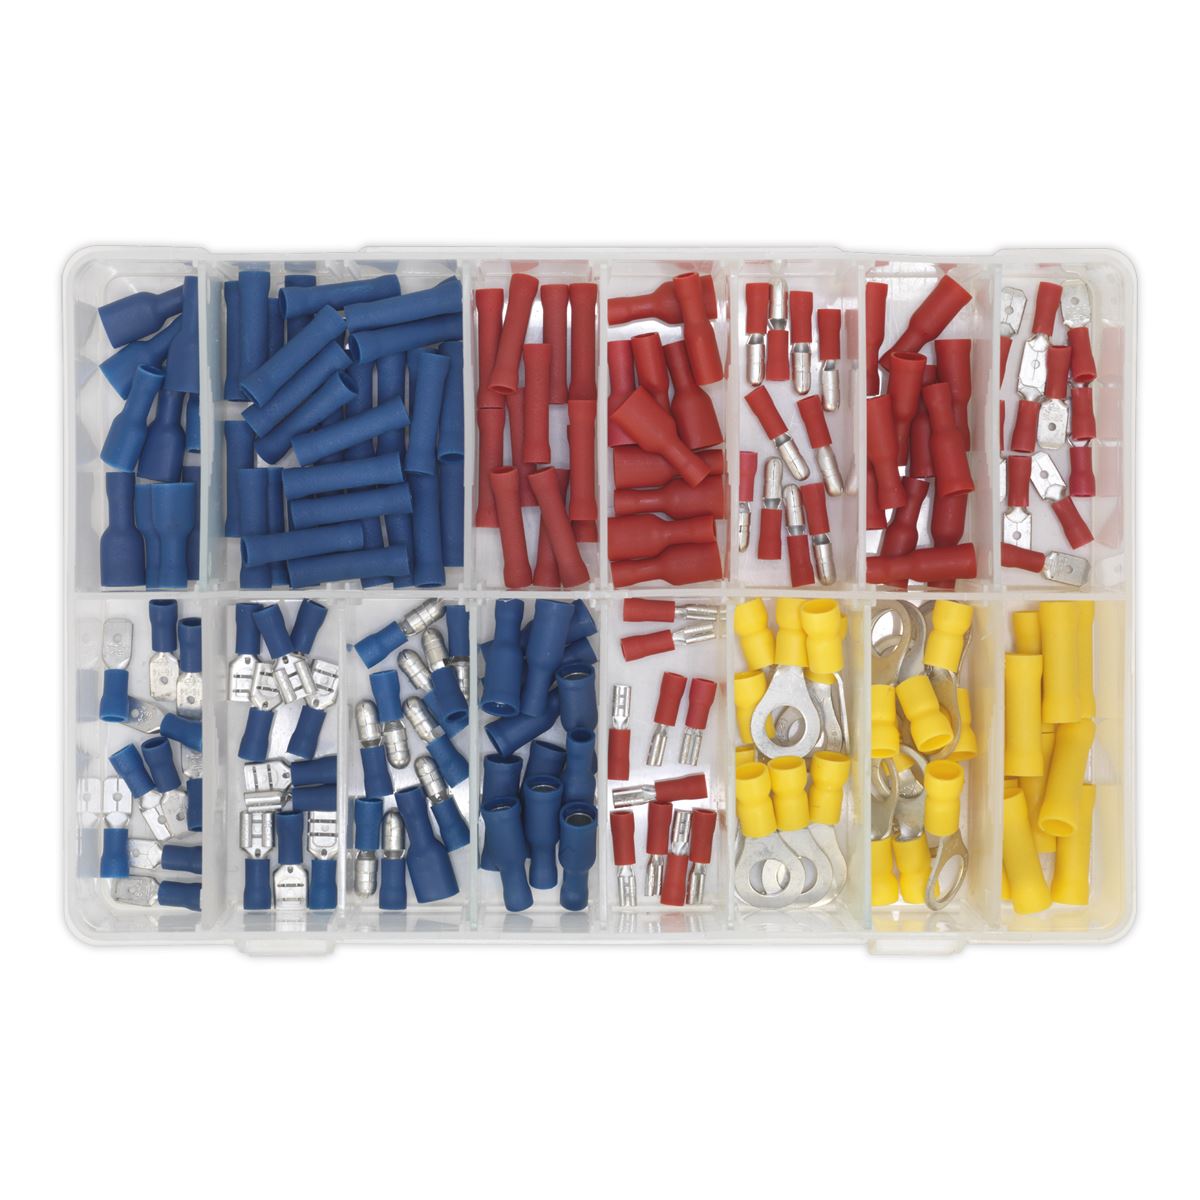 Sealey Crimp Terminal Assortment 200pc Blue, Red & Yellow